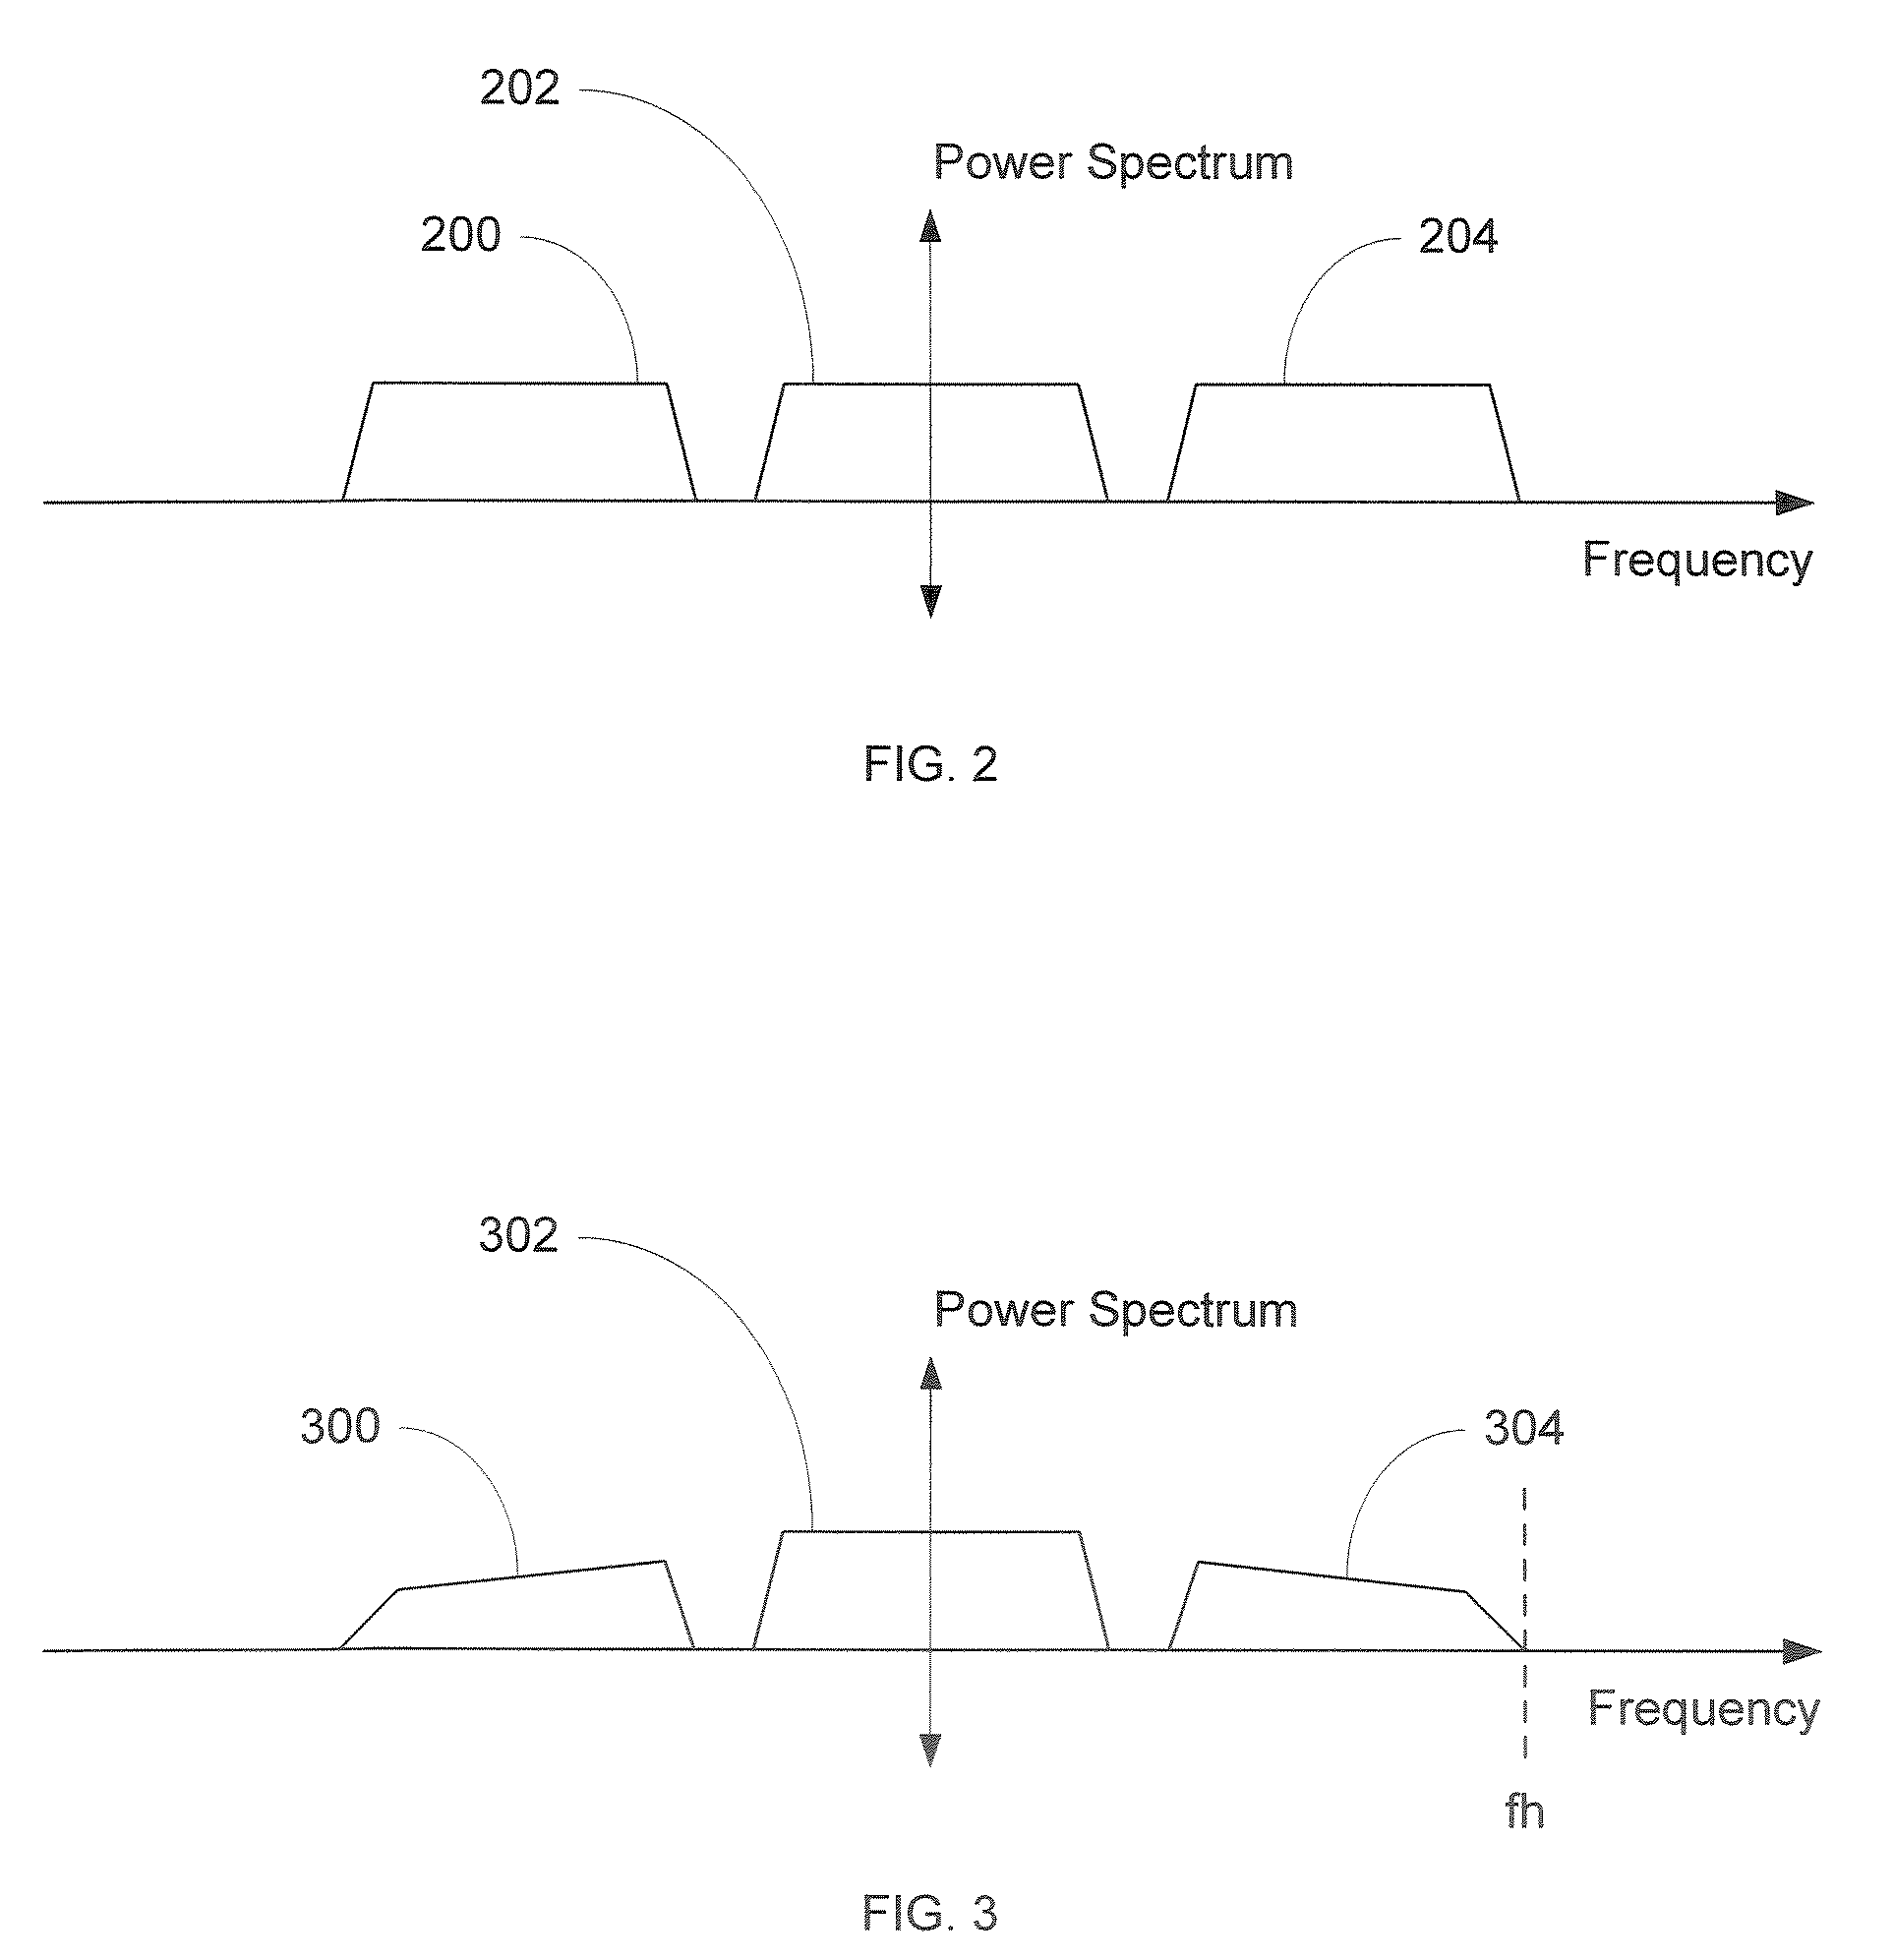 Variable rate analog-to-digital converter